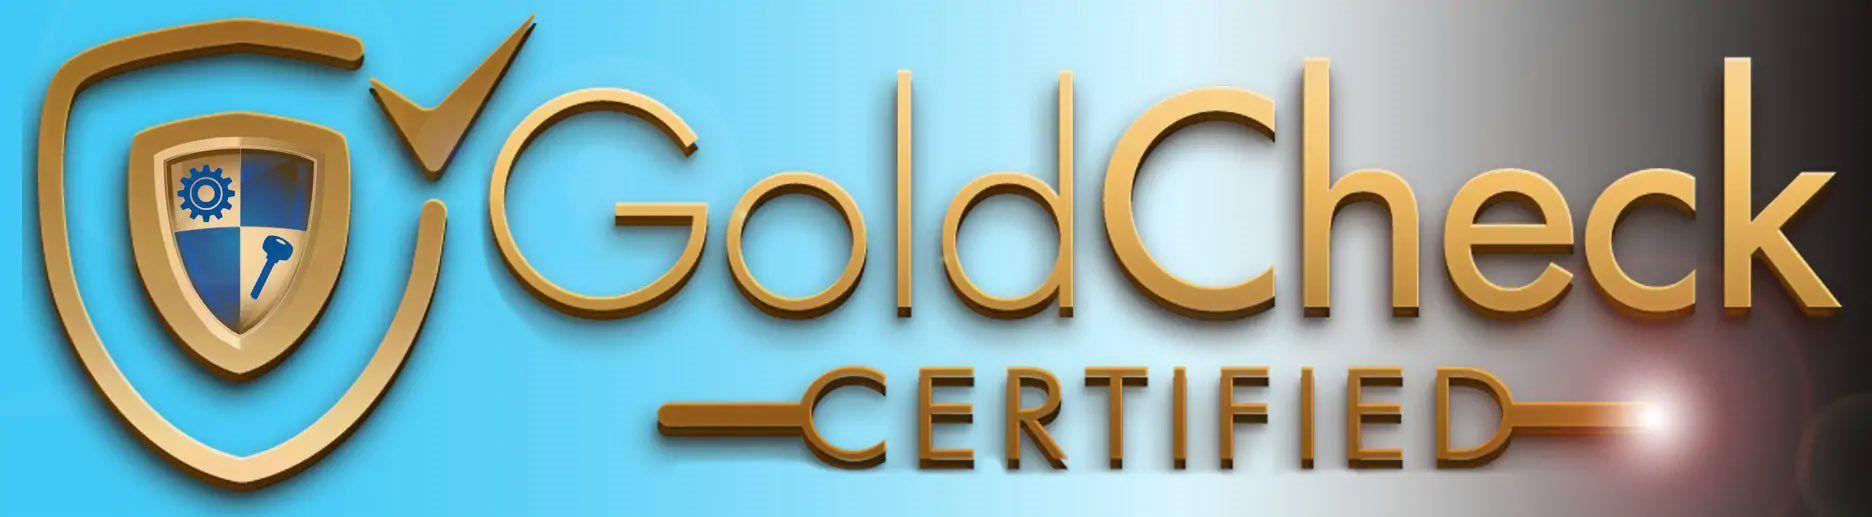 Gold Check Logo - Gold Check Certified